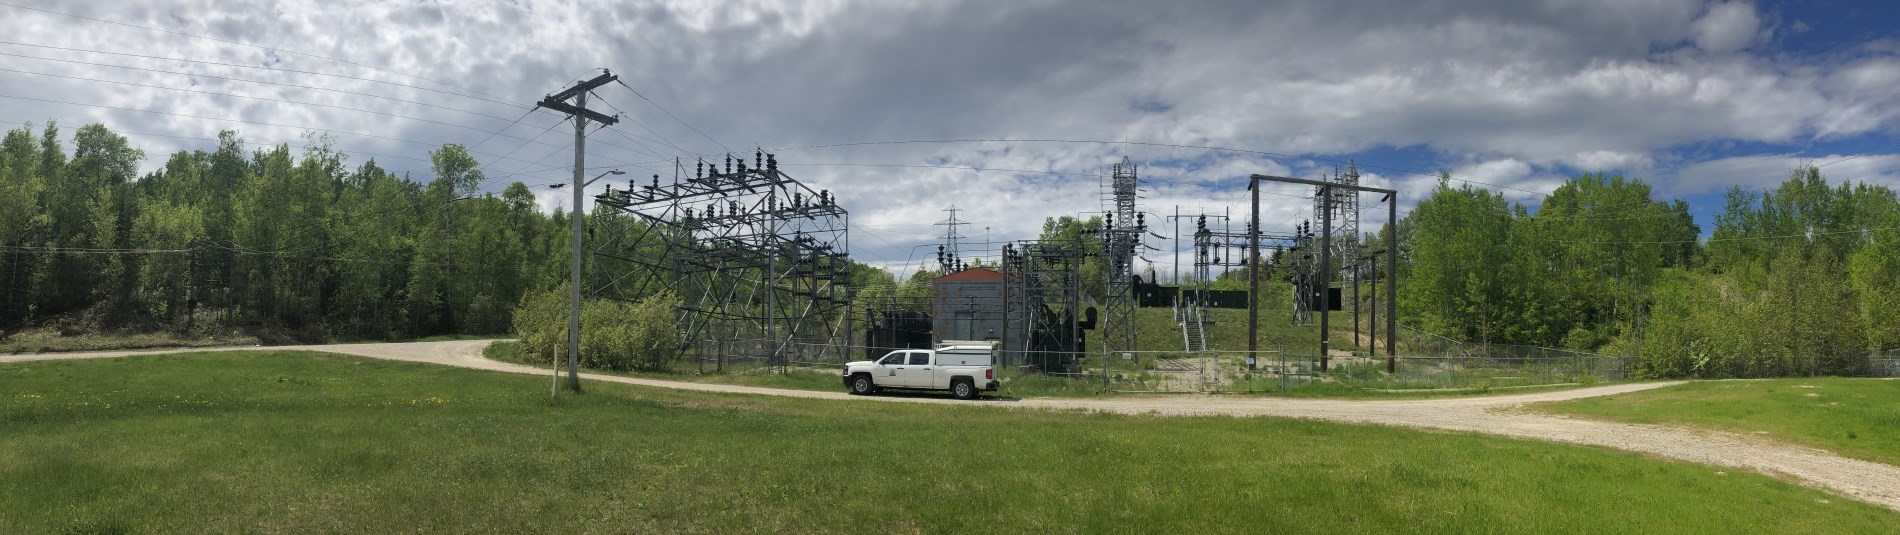 White truck at a substation